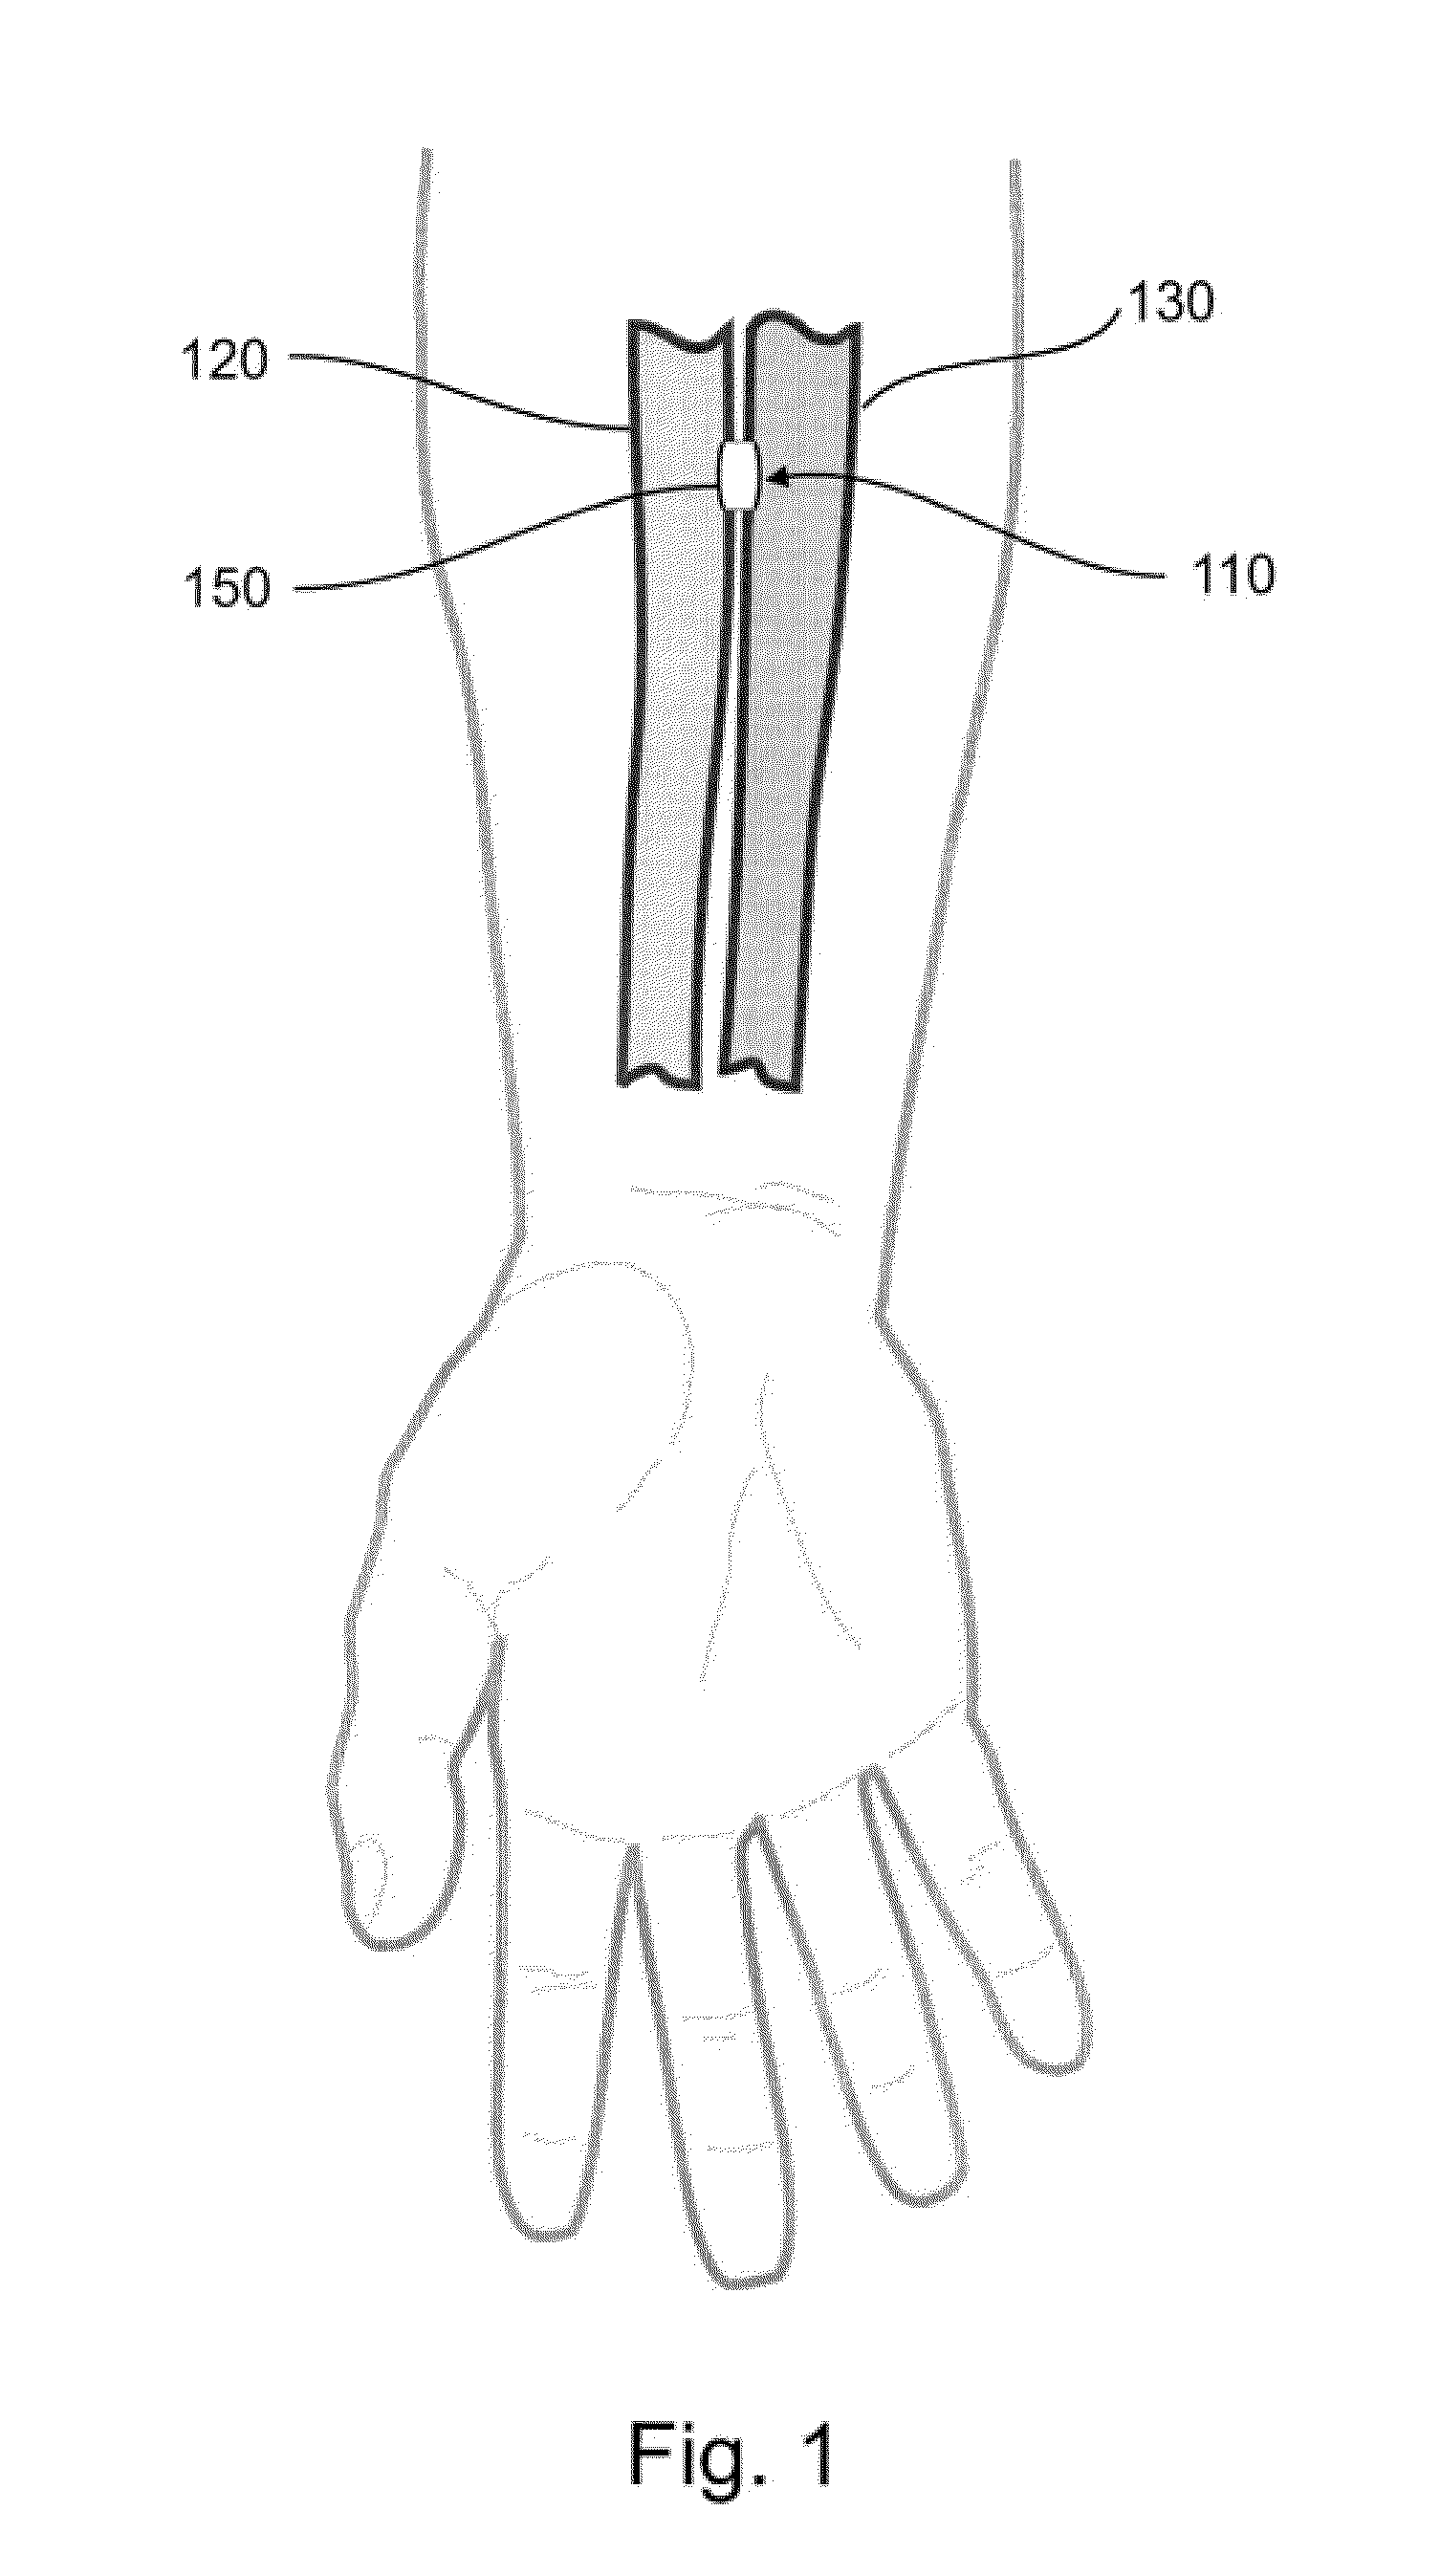 Devices, systems, and methods for peripheral arteriovenous fistula creation